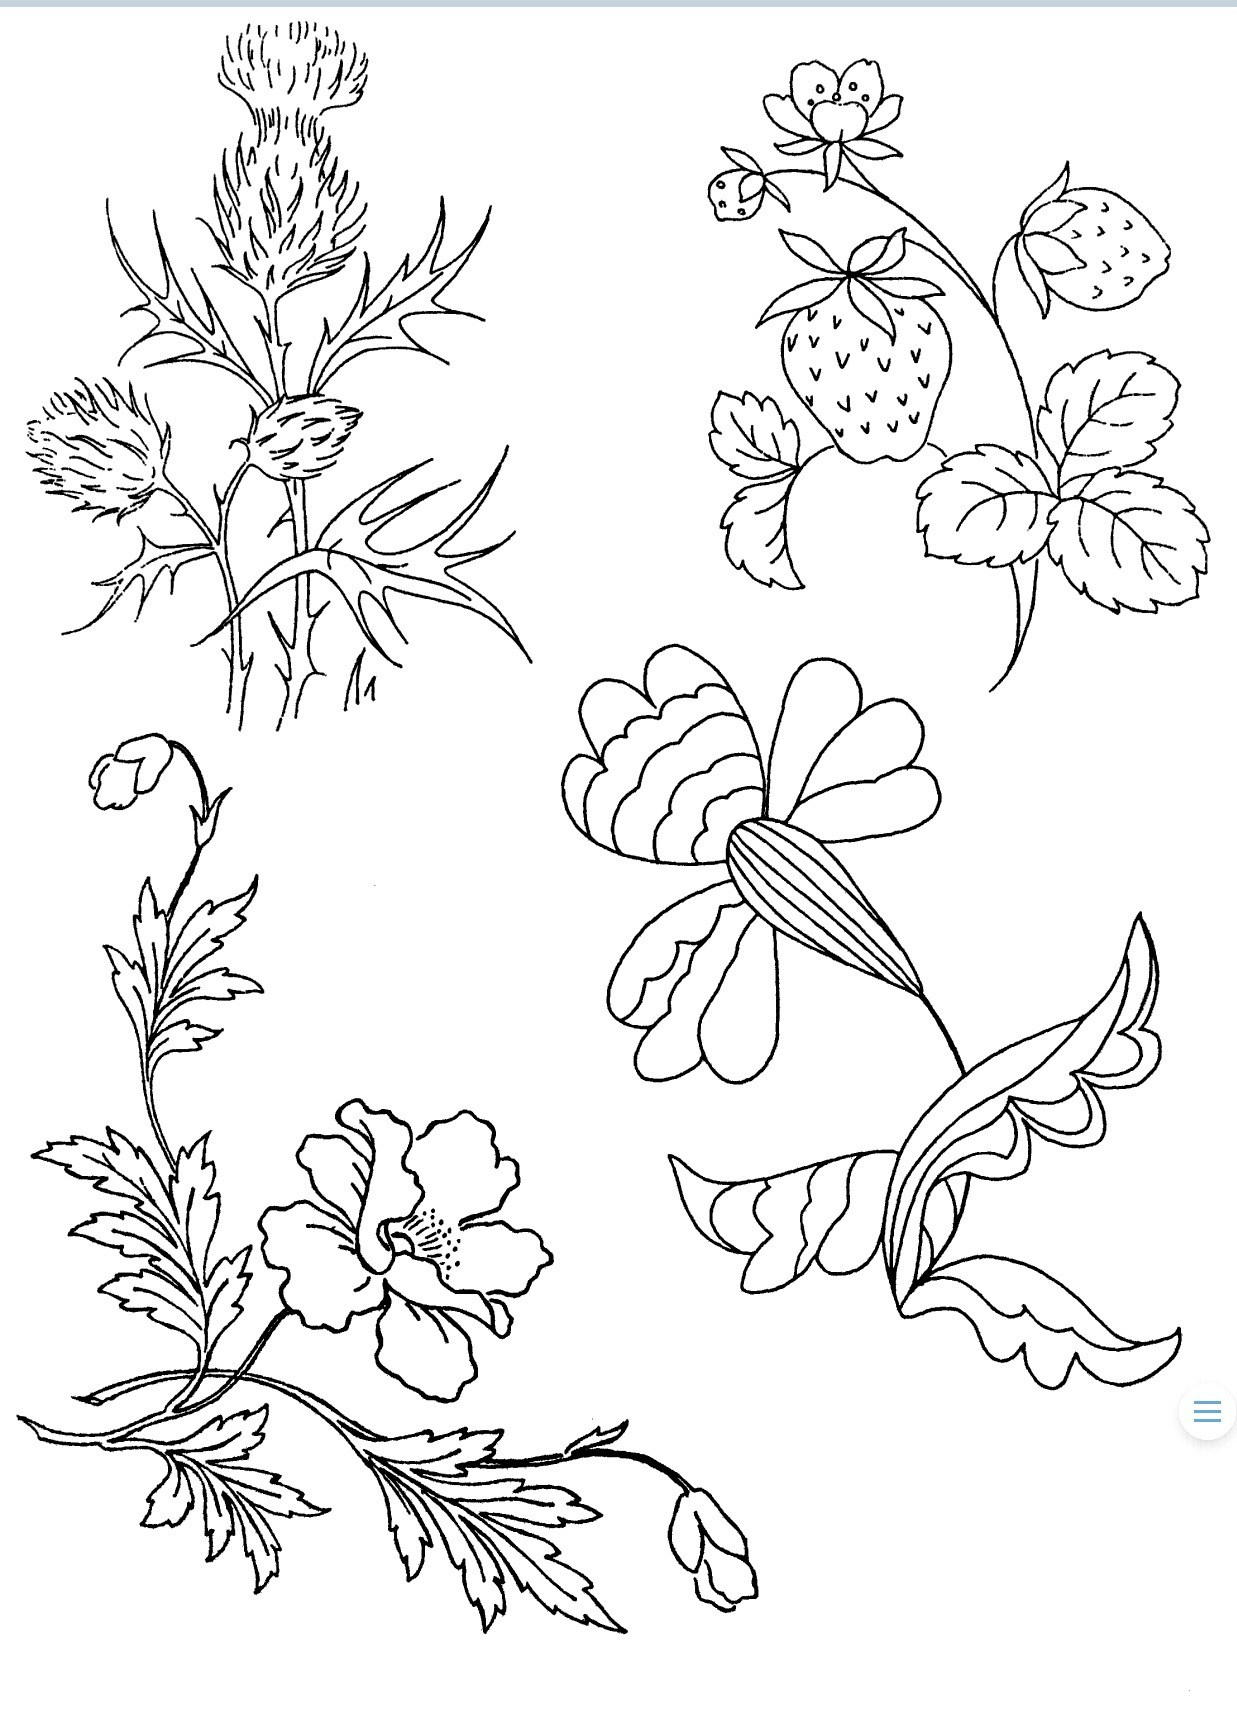 Embroidery Patterns Free Embroidery Patterns Free Pdf Lots Of Patterns